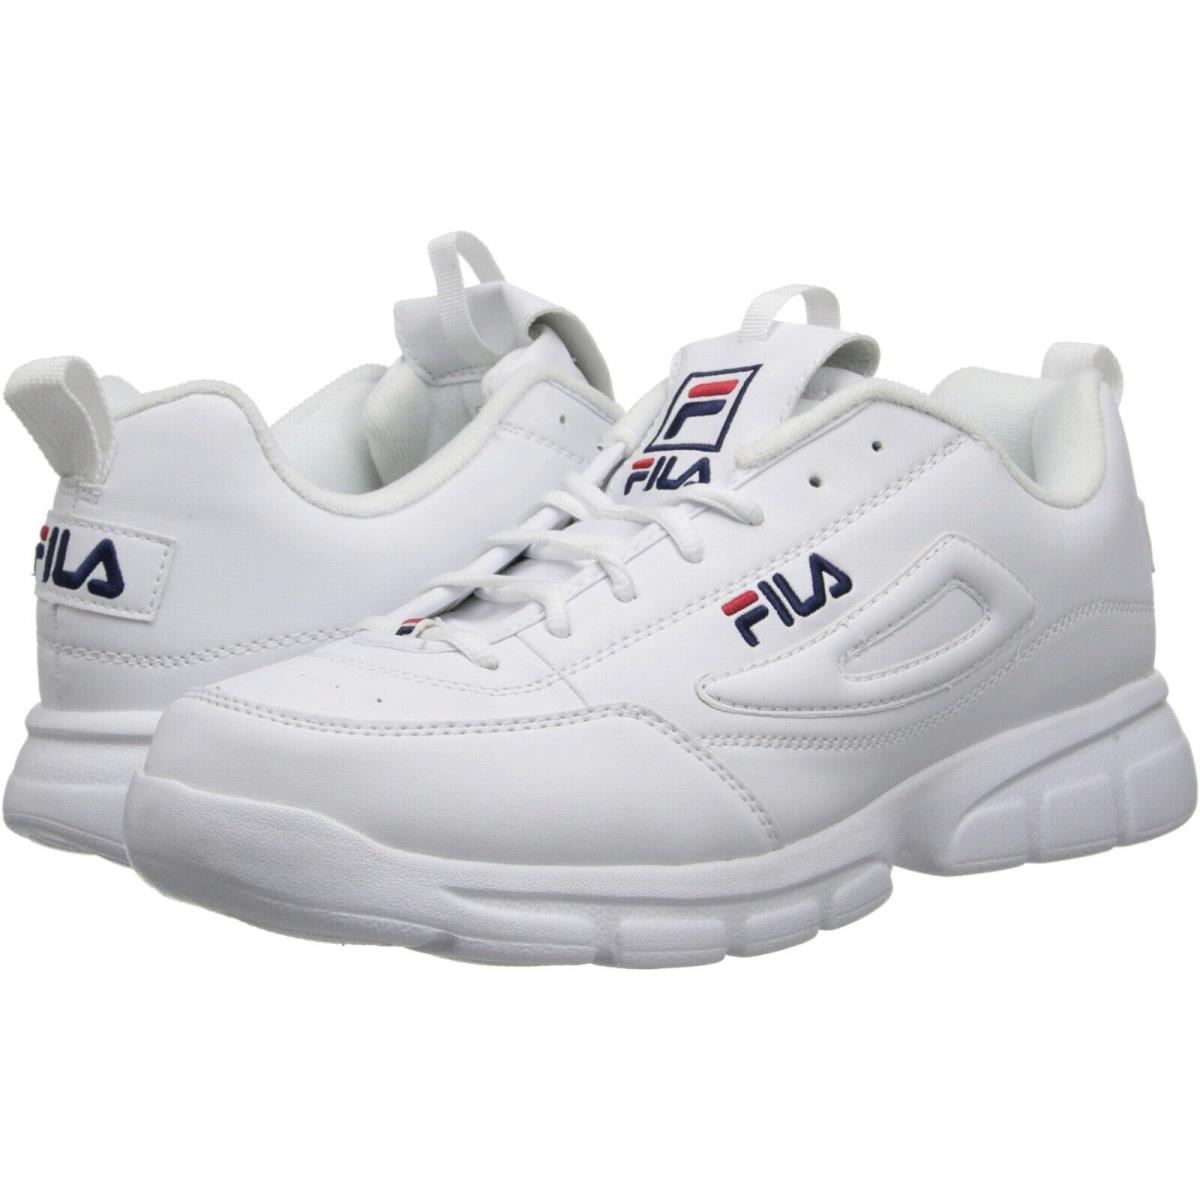 Men Fila Disruptor SE Casual Shoes 1SX60022-166 White Navy Red